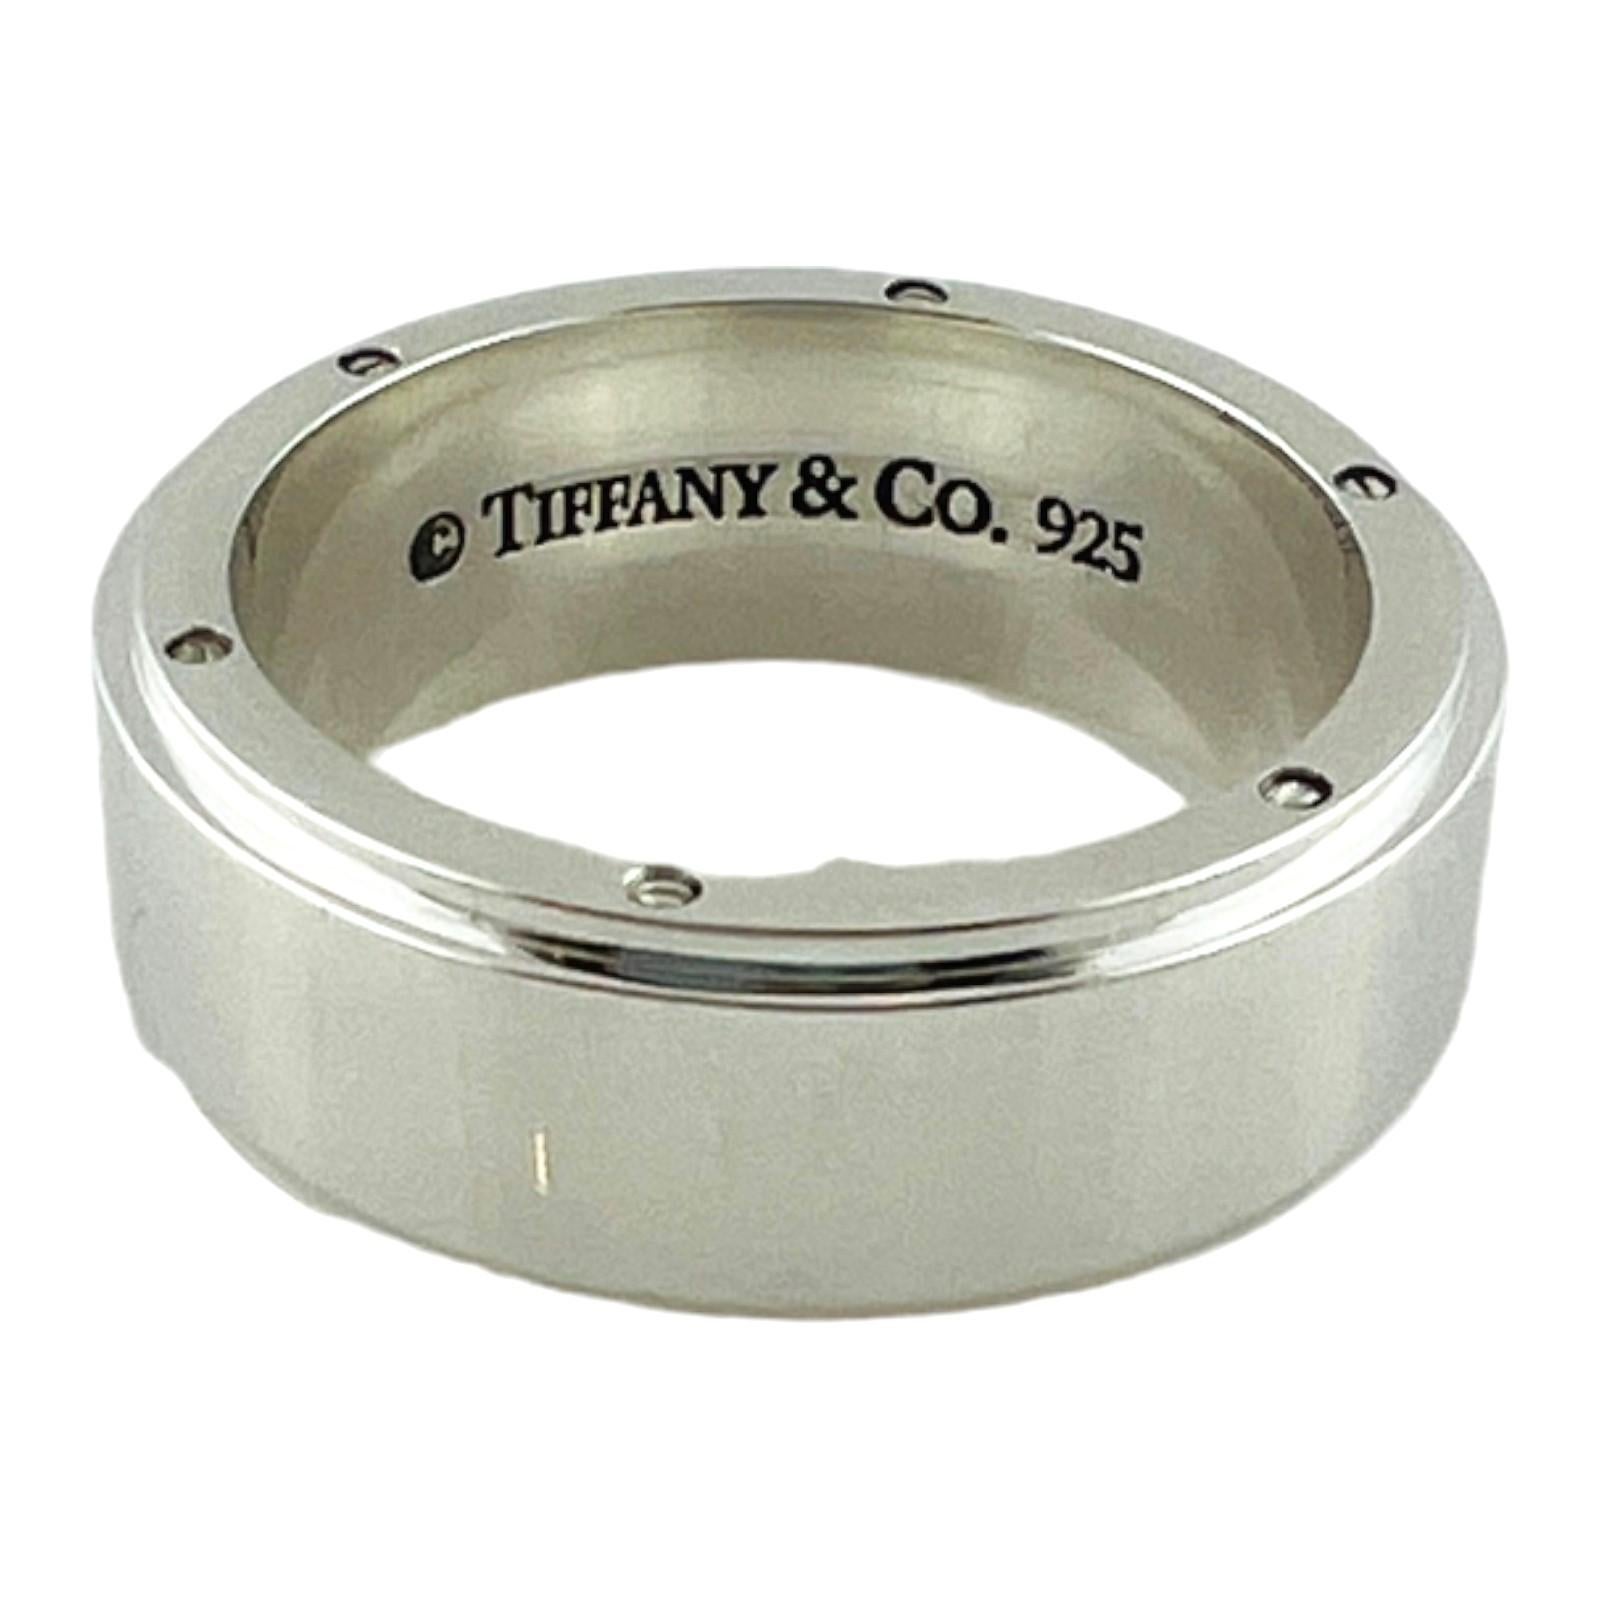 Tiffany & Co. Metropolis Sterling Silver Men's Band

Size 13

This men's sterling silver band is approx. 9mm wide

Stamped c Tiffany & Co. 925

12.7 dwt / 19.75 g

Very good pre owned condition

Will come shipped in a gift box priority mail with